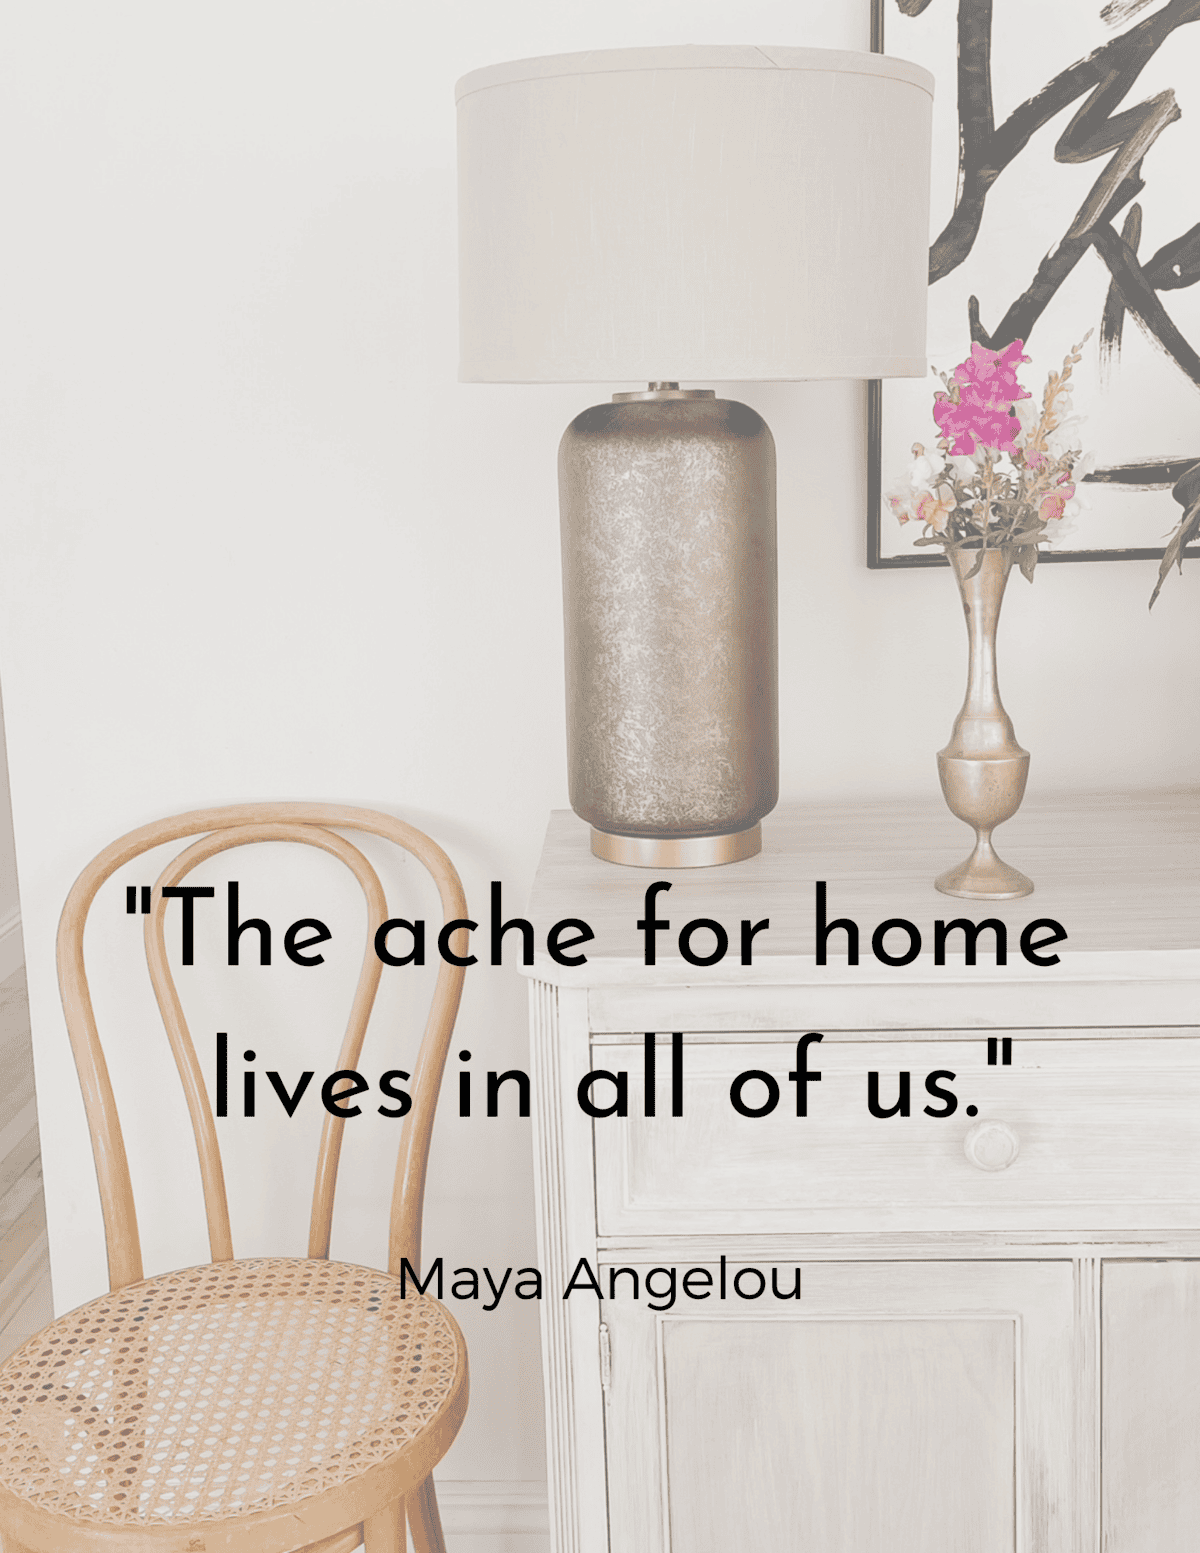 Maya Angelou quote on home over a contemporary home interior close up 